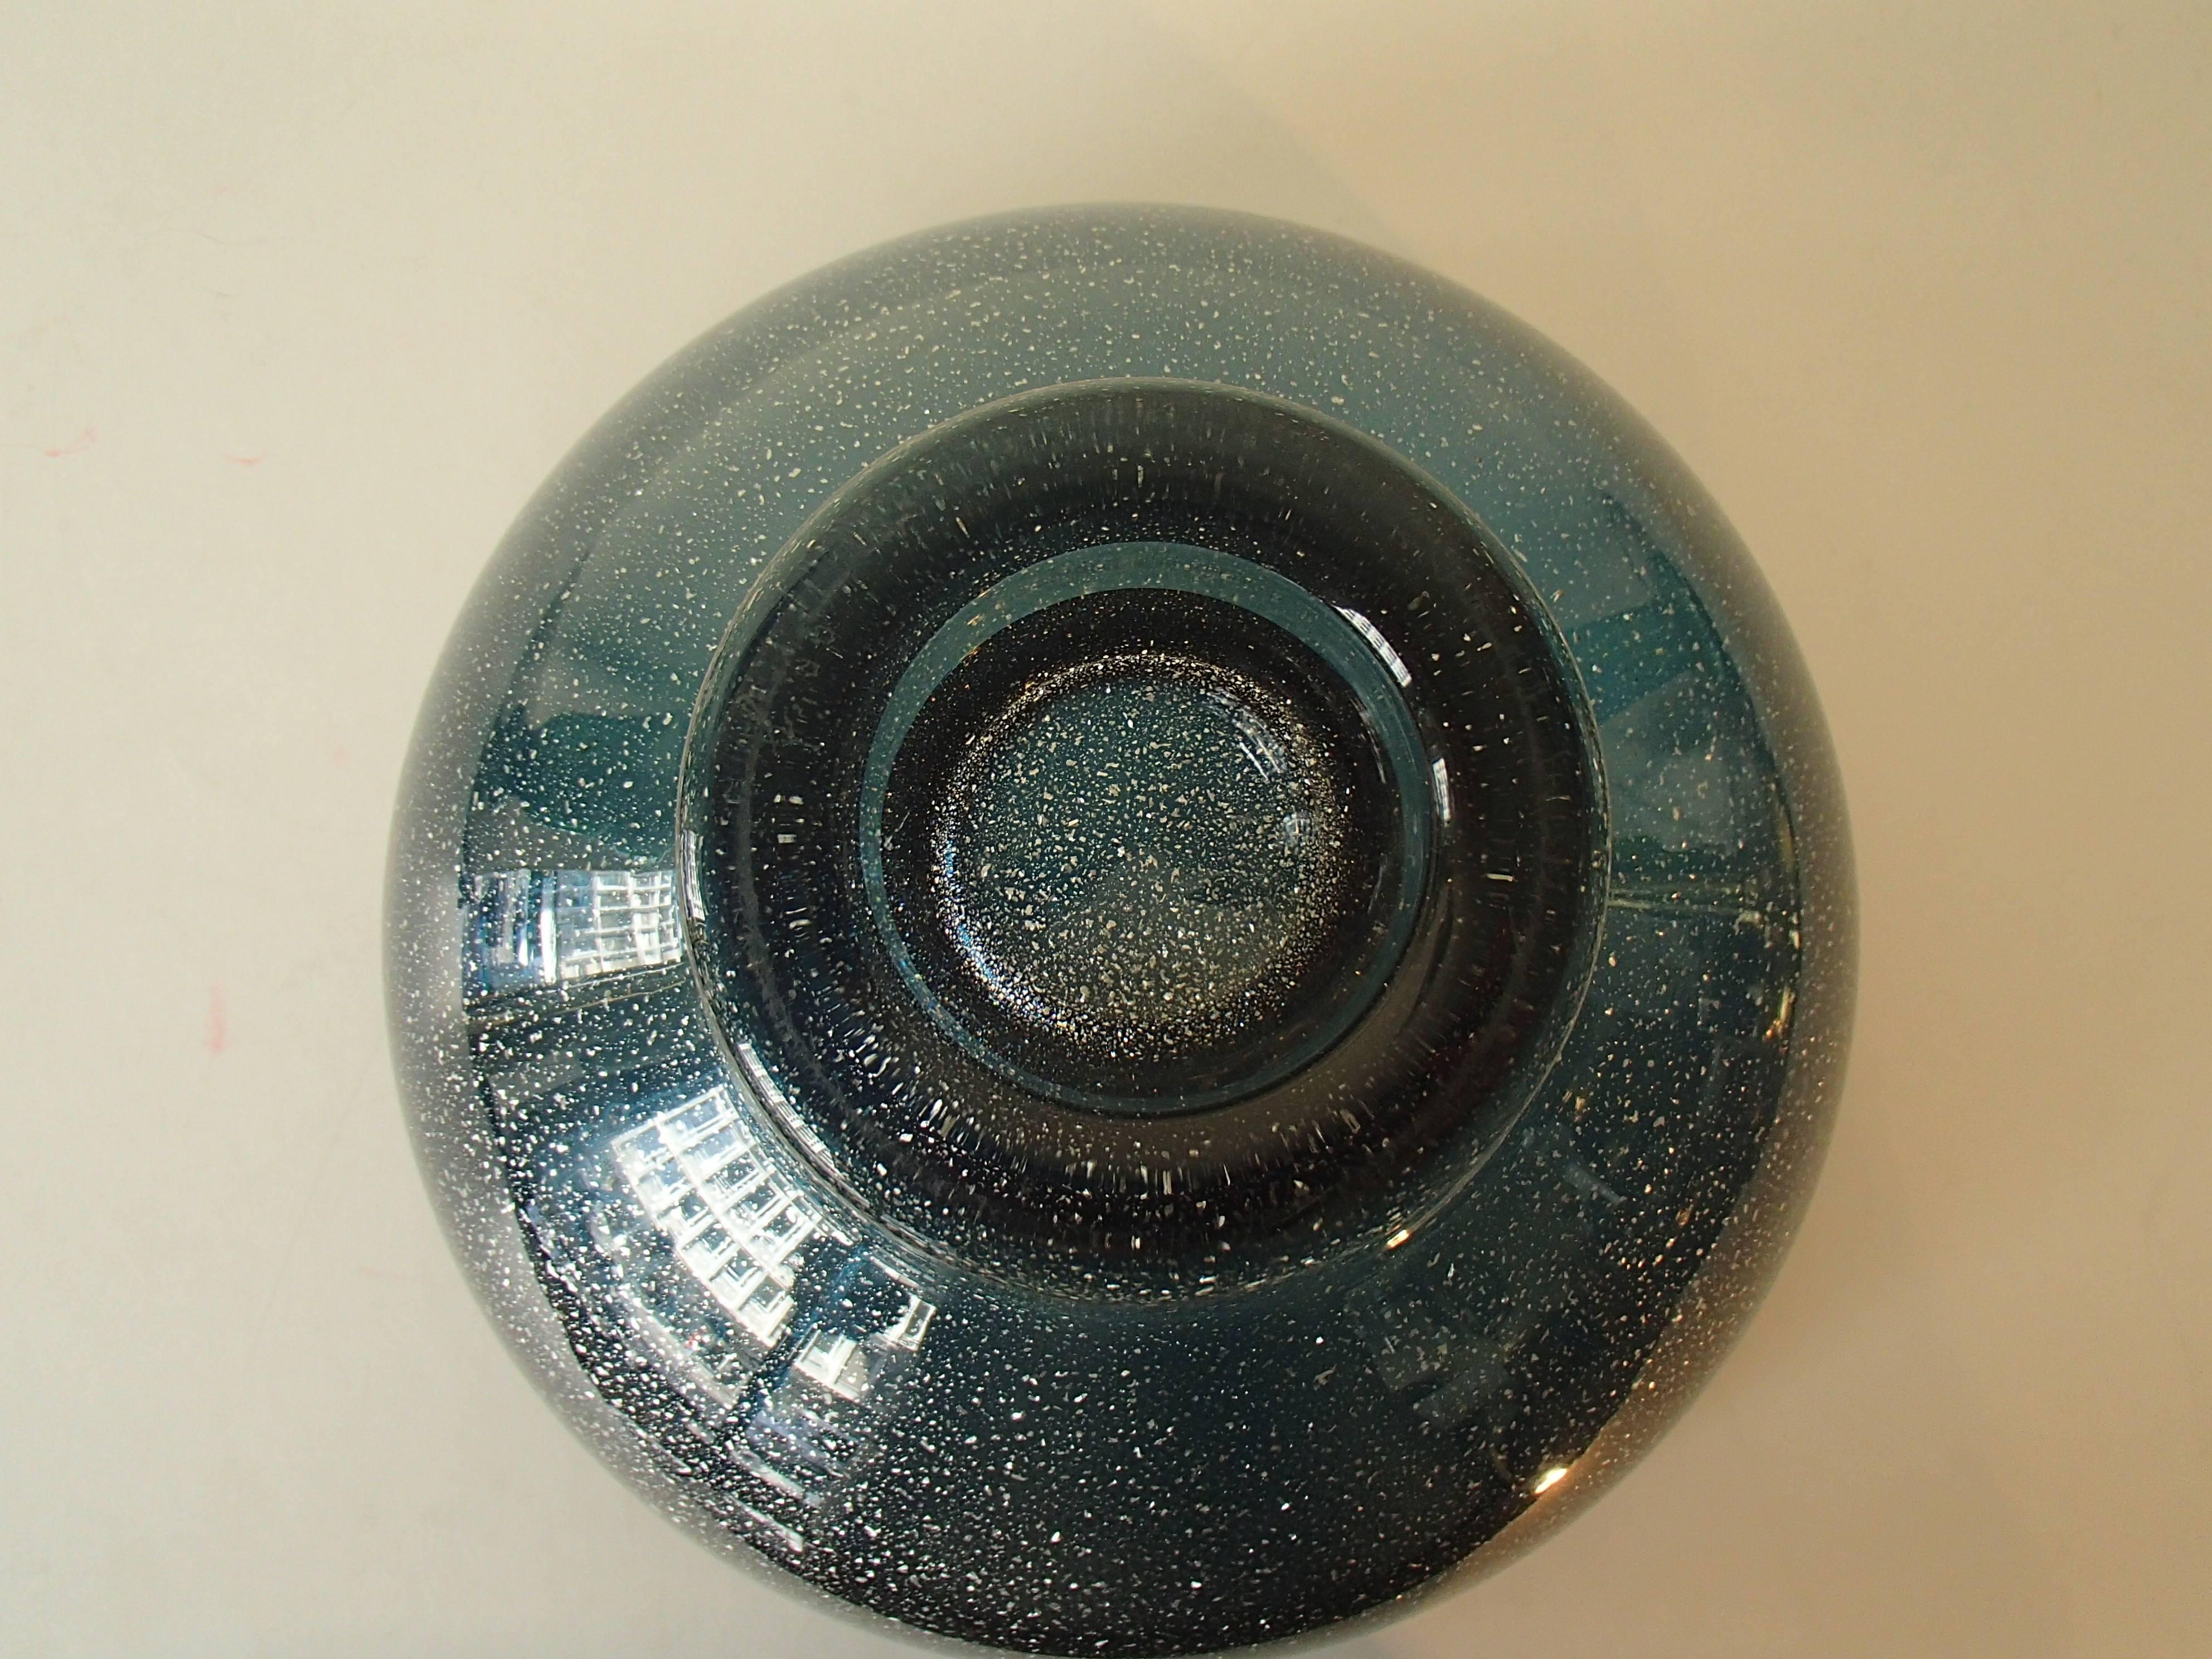 Mid-20th Century Mid-Century Modern Vessel Blue with Silver Inlays by Graal Glas Signed FS 66 For Sale